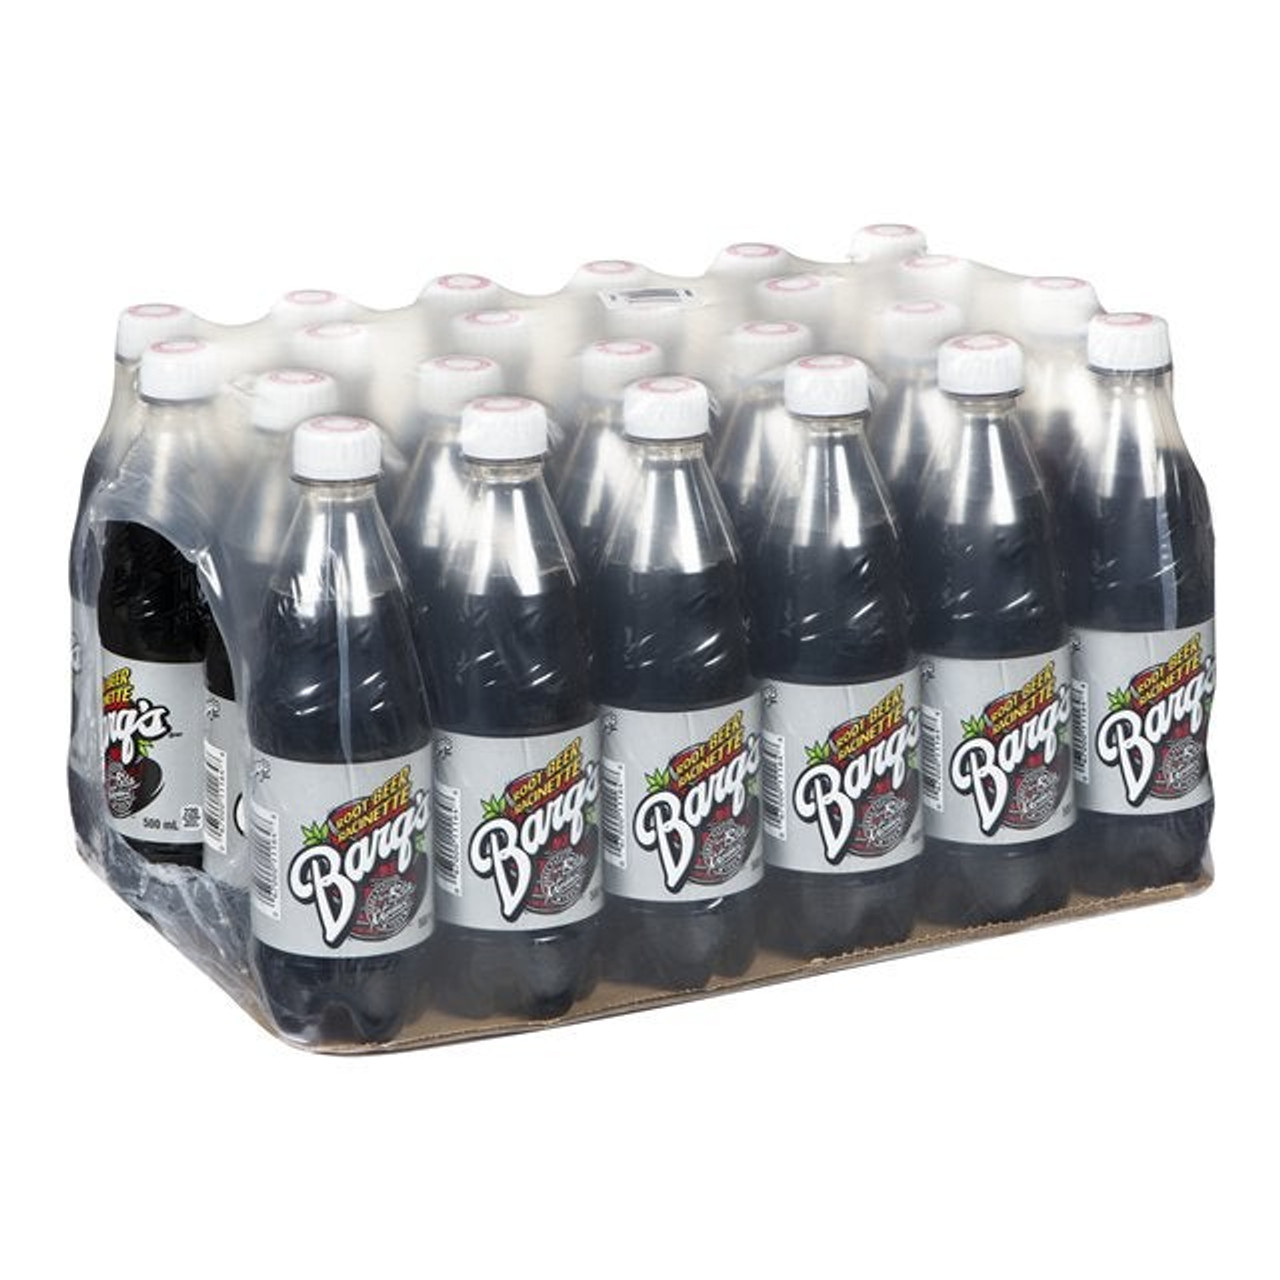 Barq's Root Beer Soft Drink